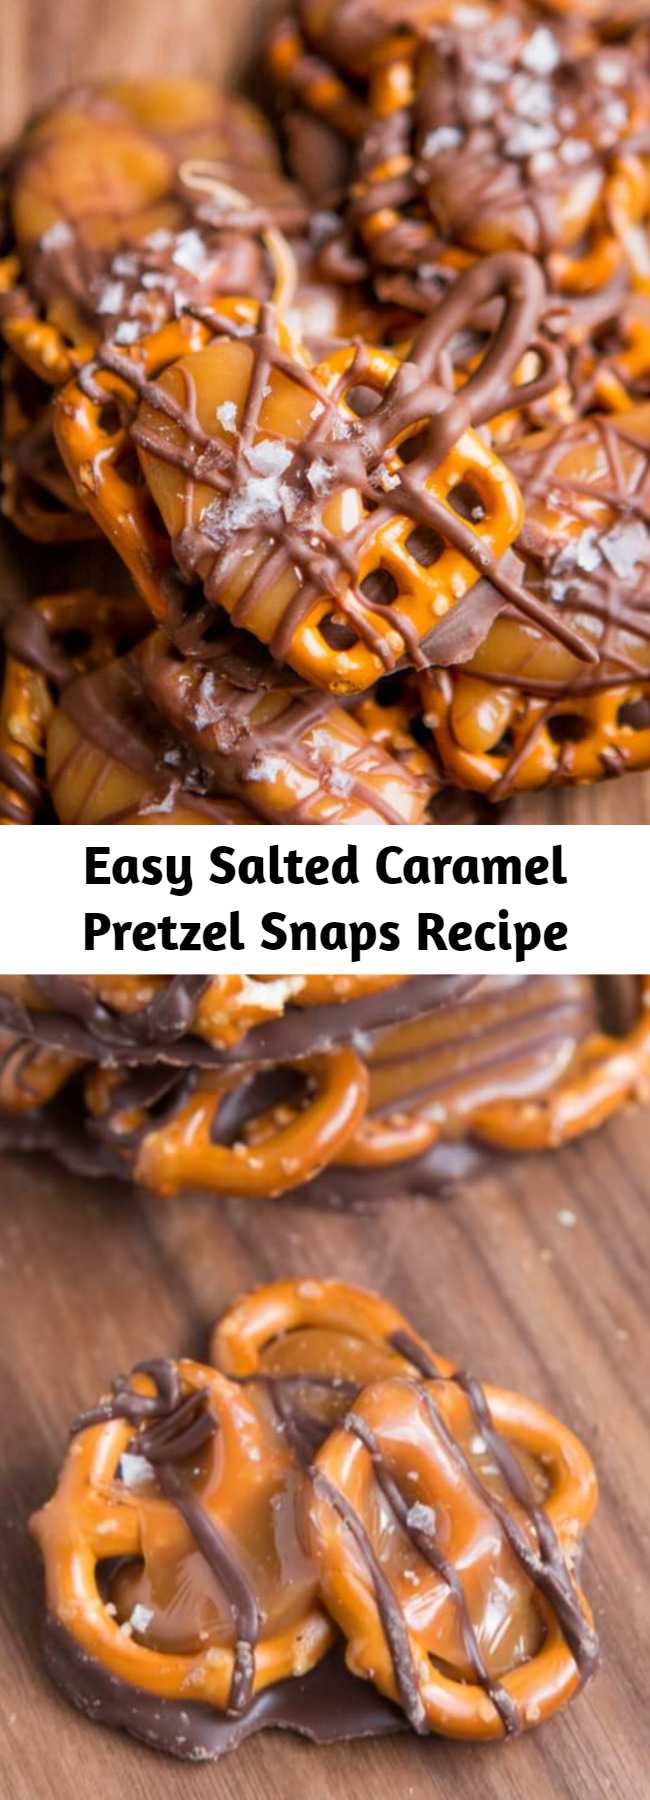 Easy Salted Caramel Pretzel Snaps Recipe - We cannot stop munching on these salted caramel pretzel snaps! They only take a couple of ingredients and no time at all to make!